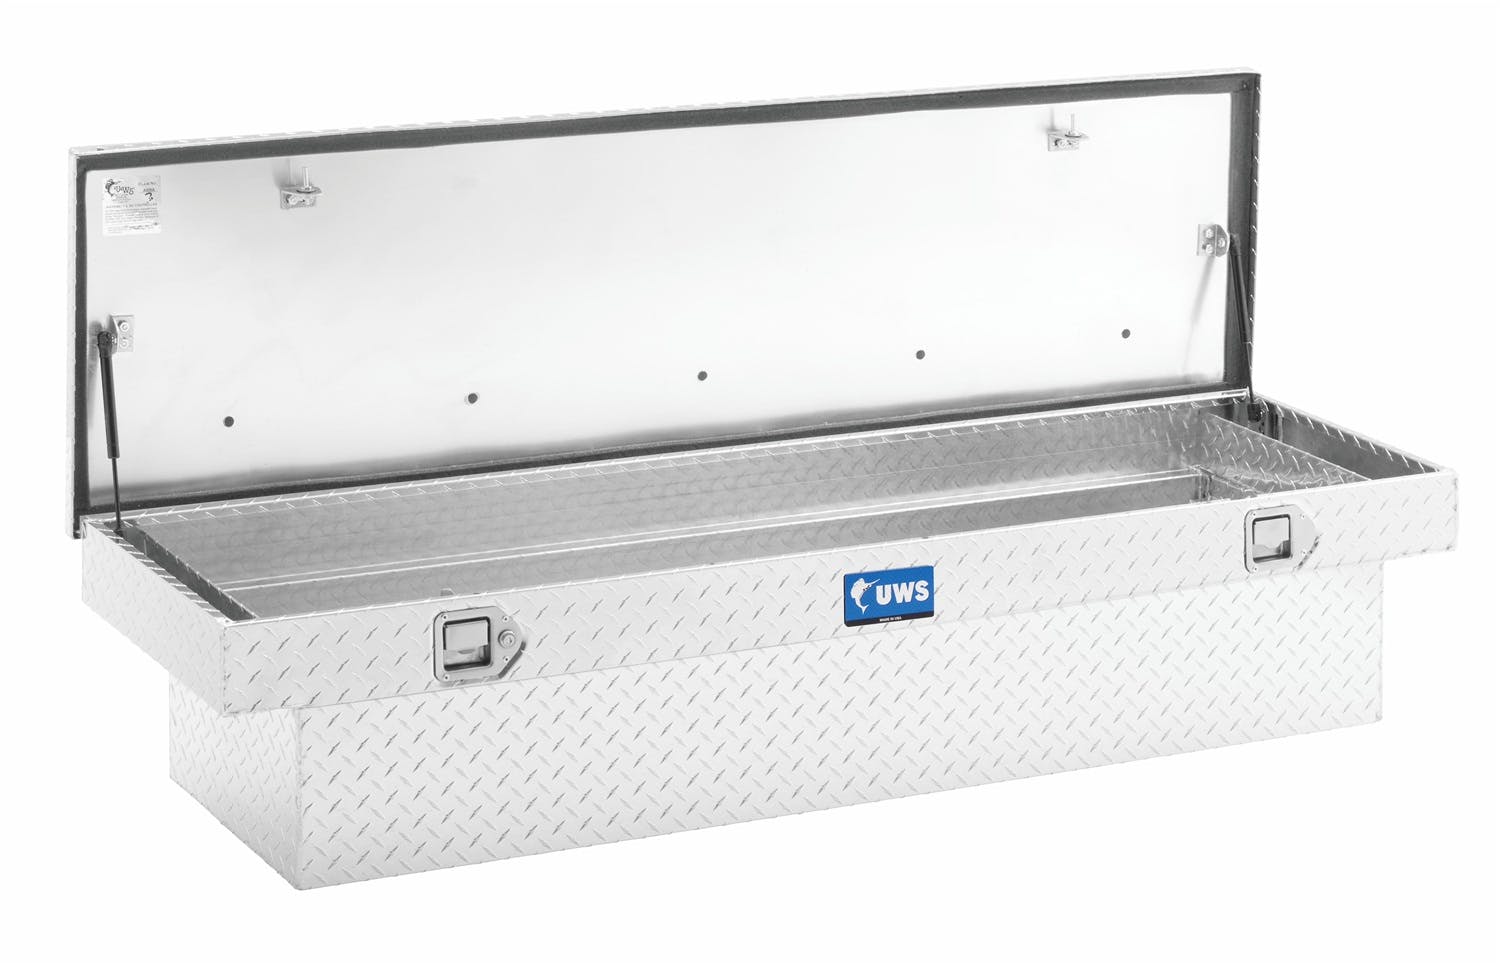 UWS TBS-63-A 63 inch Aluminum Single Lid Crossover Toolbox Angled